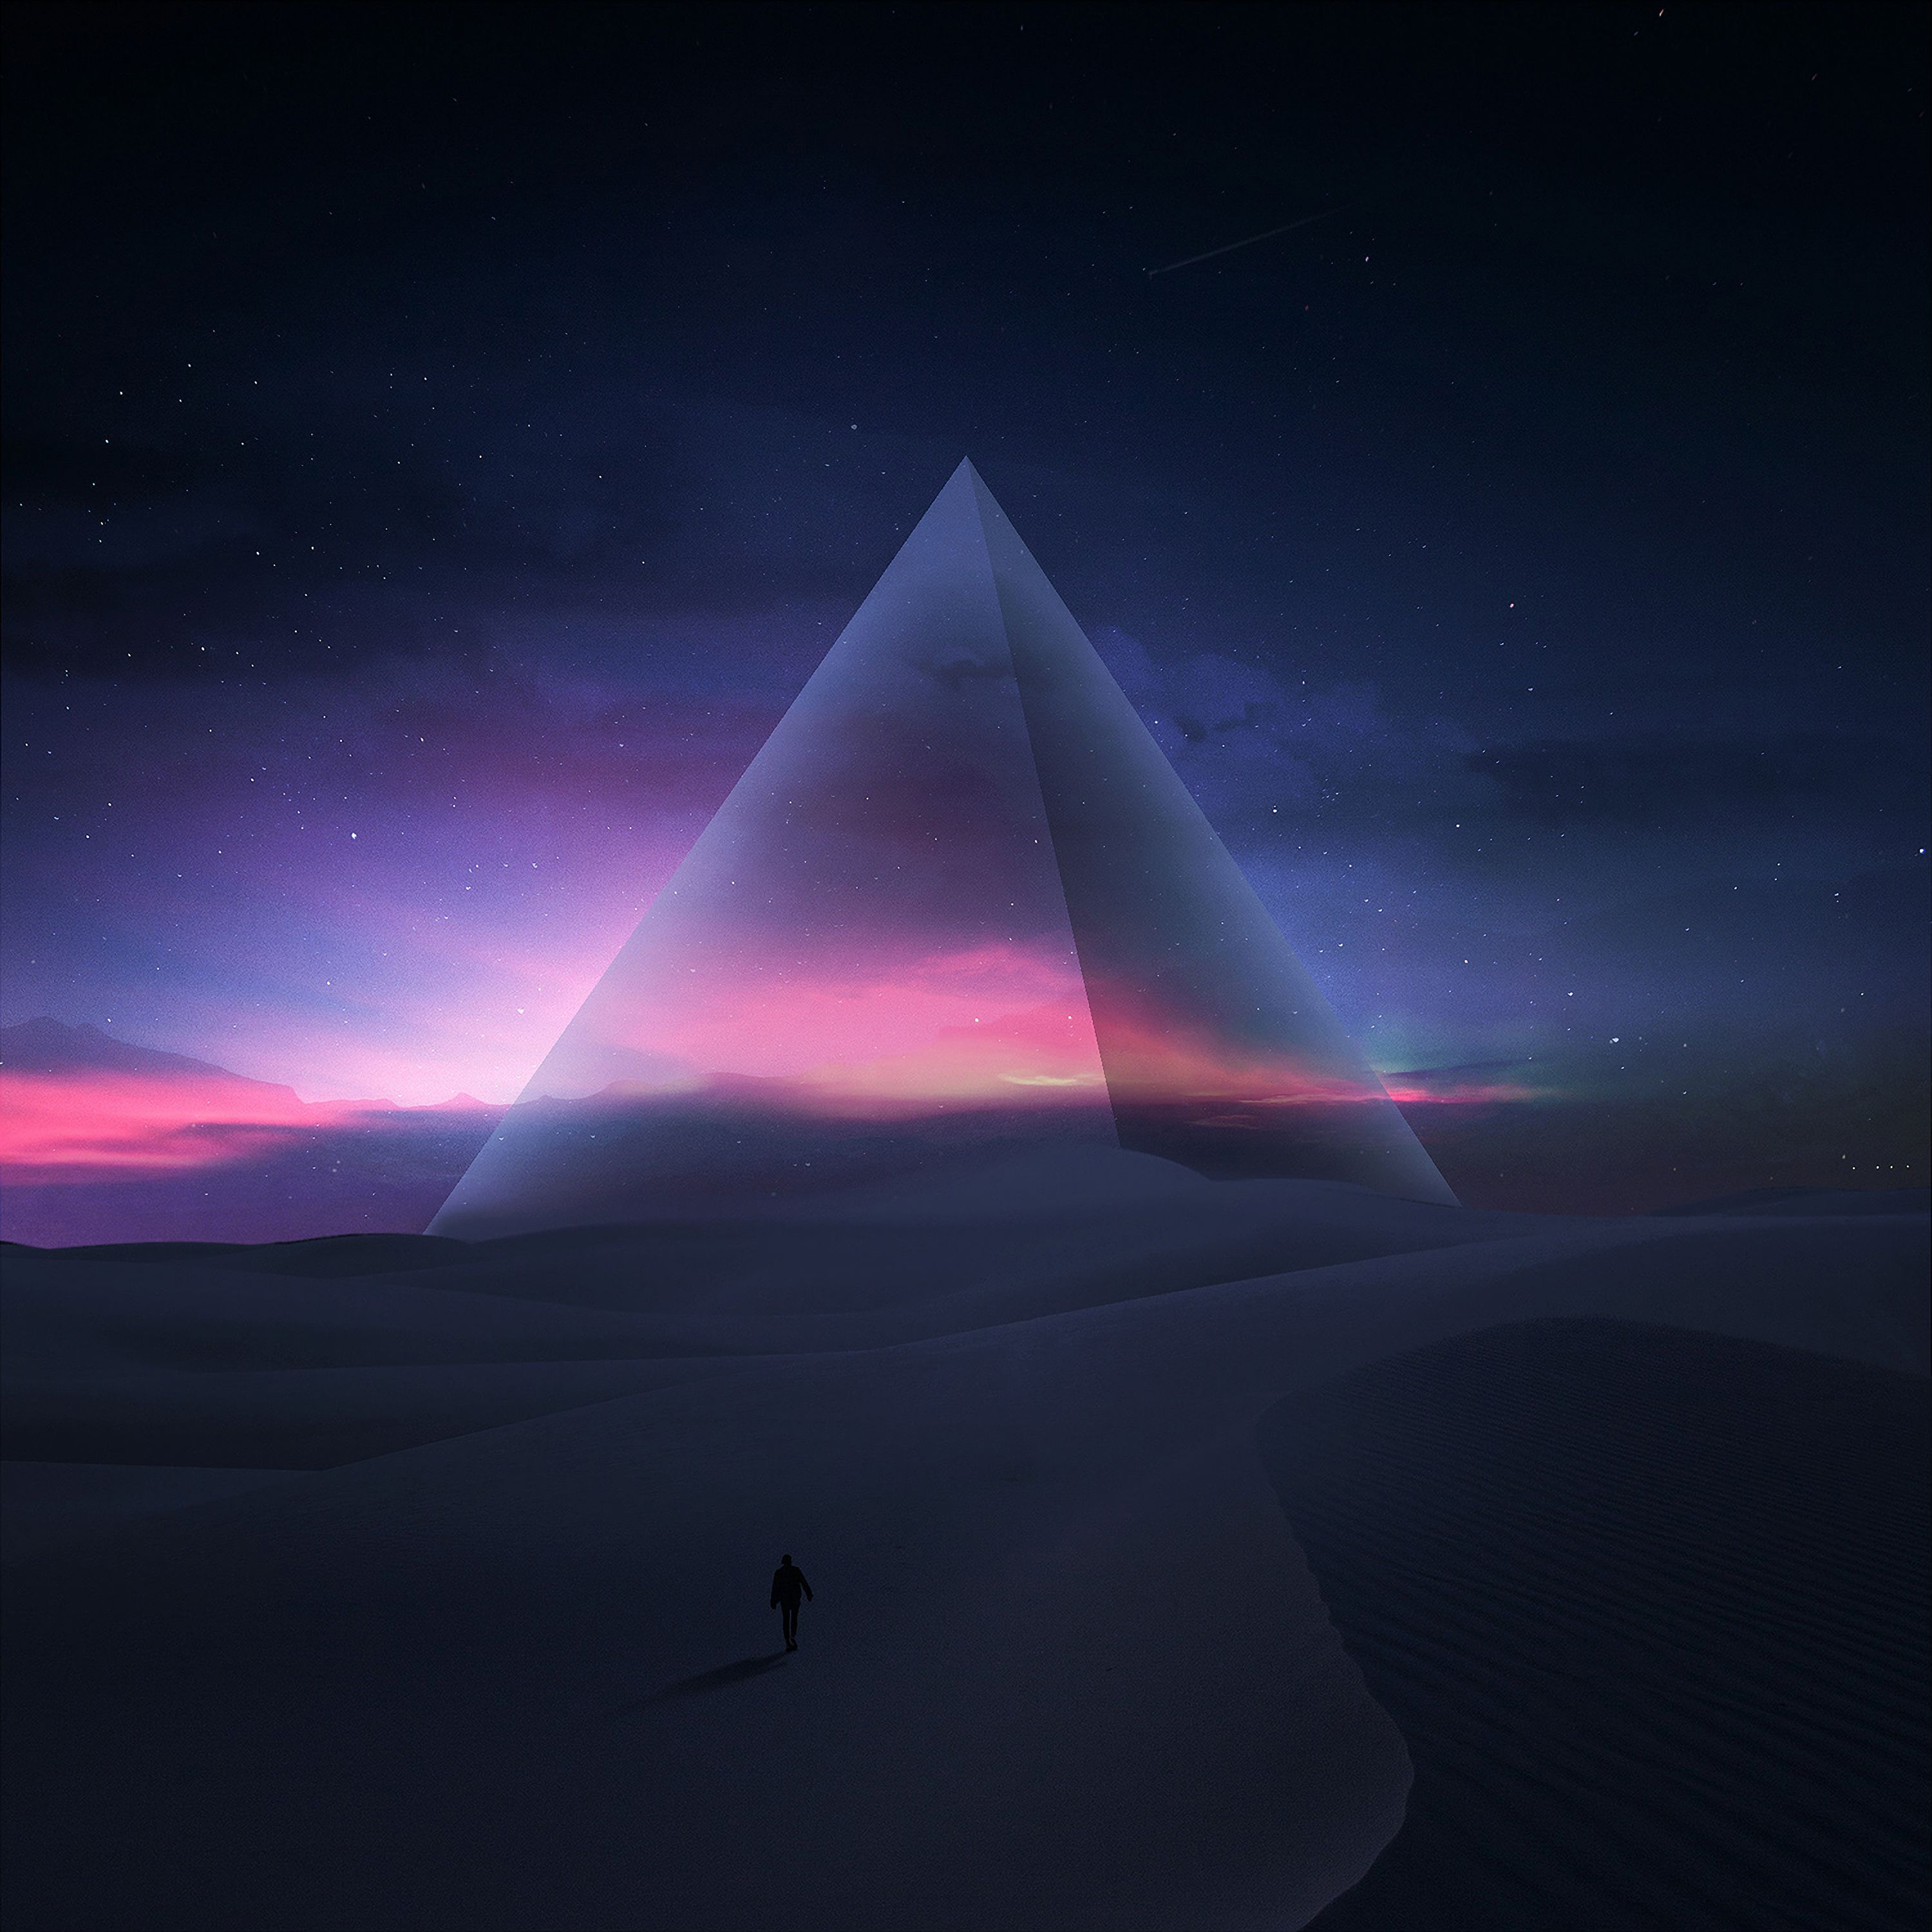 62671 download wallpaper art, pyramid, stars, desert, silhouette, starry sky screensavers and pictures for free